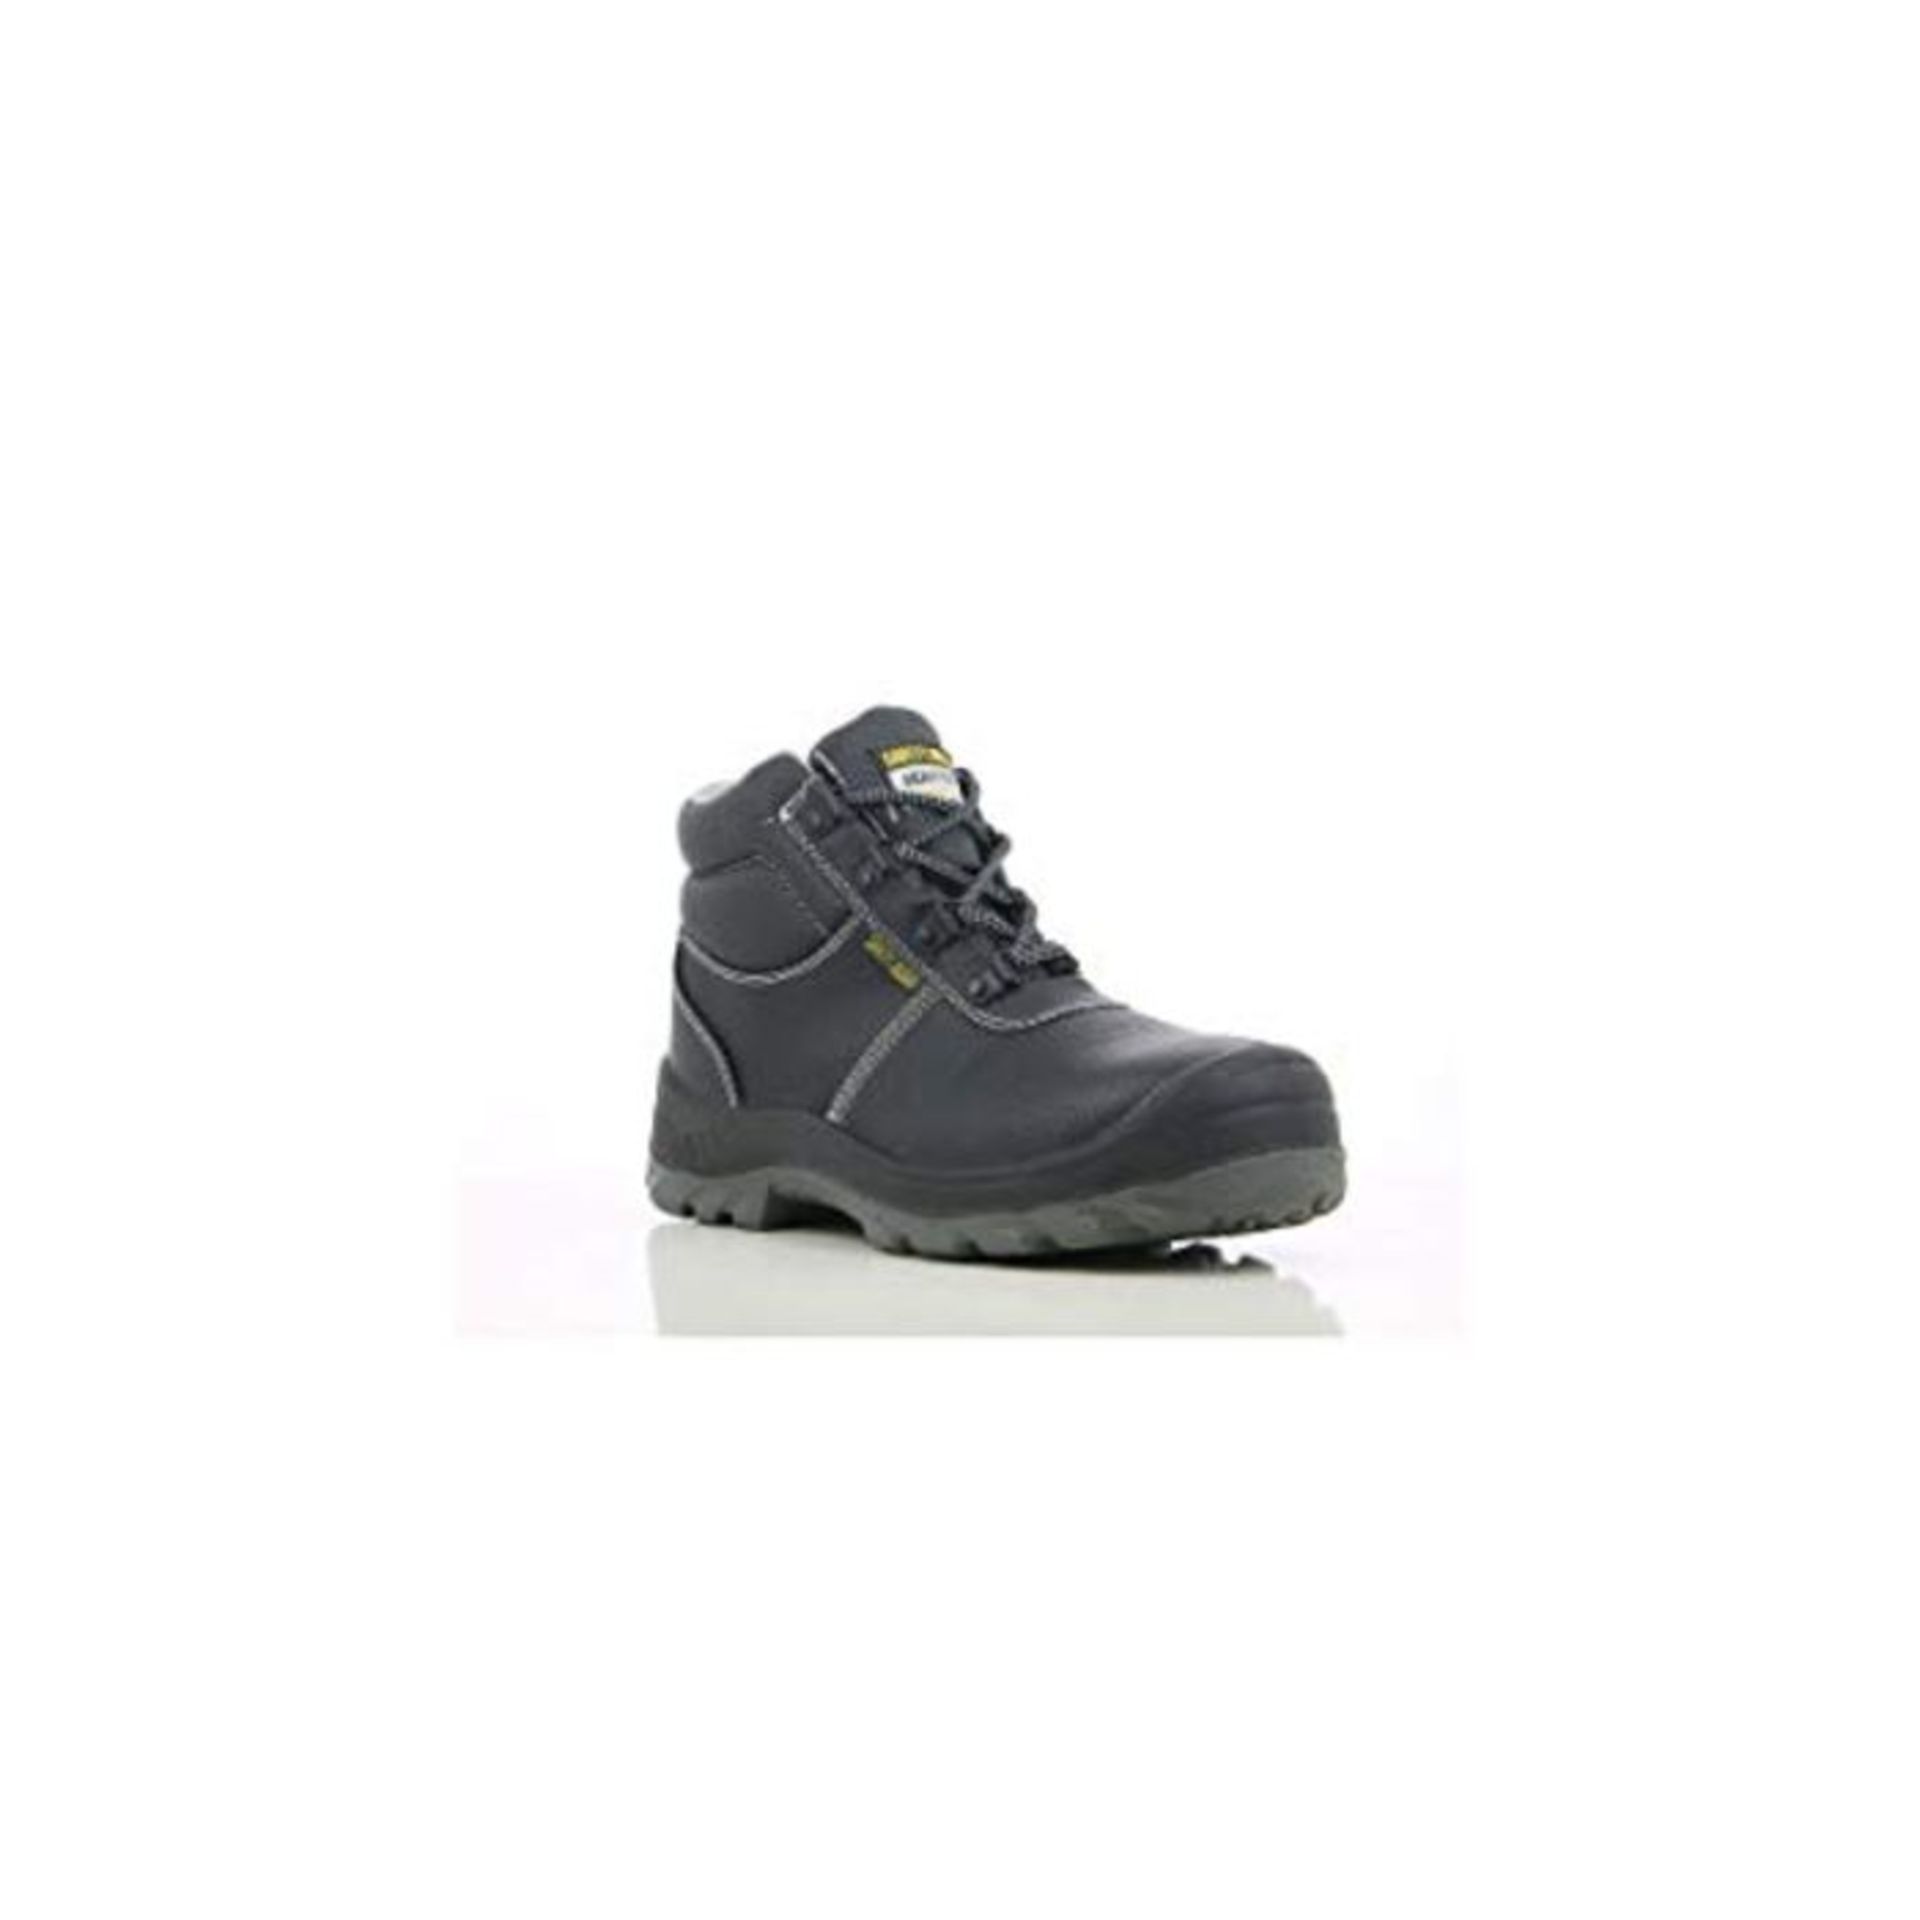 Safety Jogger Safety Boot - Steel Toe Cap S3/S1P Work Shoe for Men or Women, Anti Slip